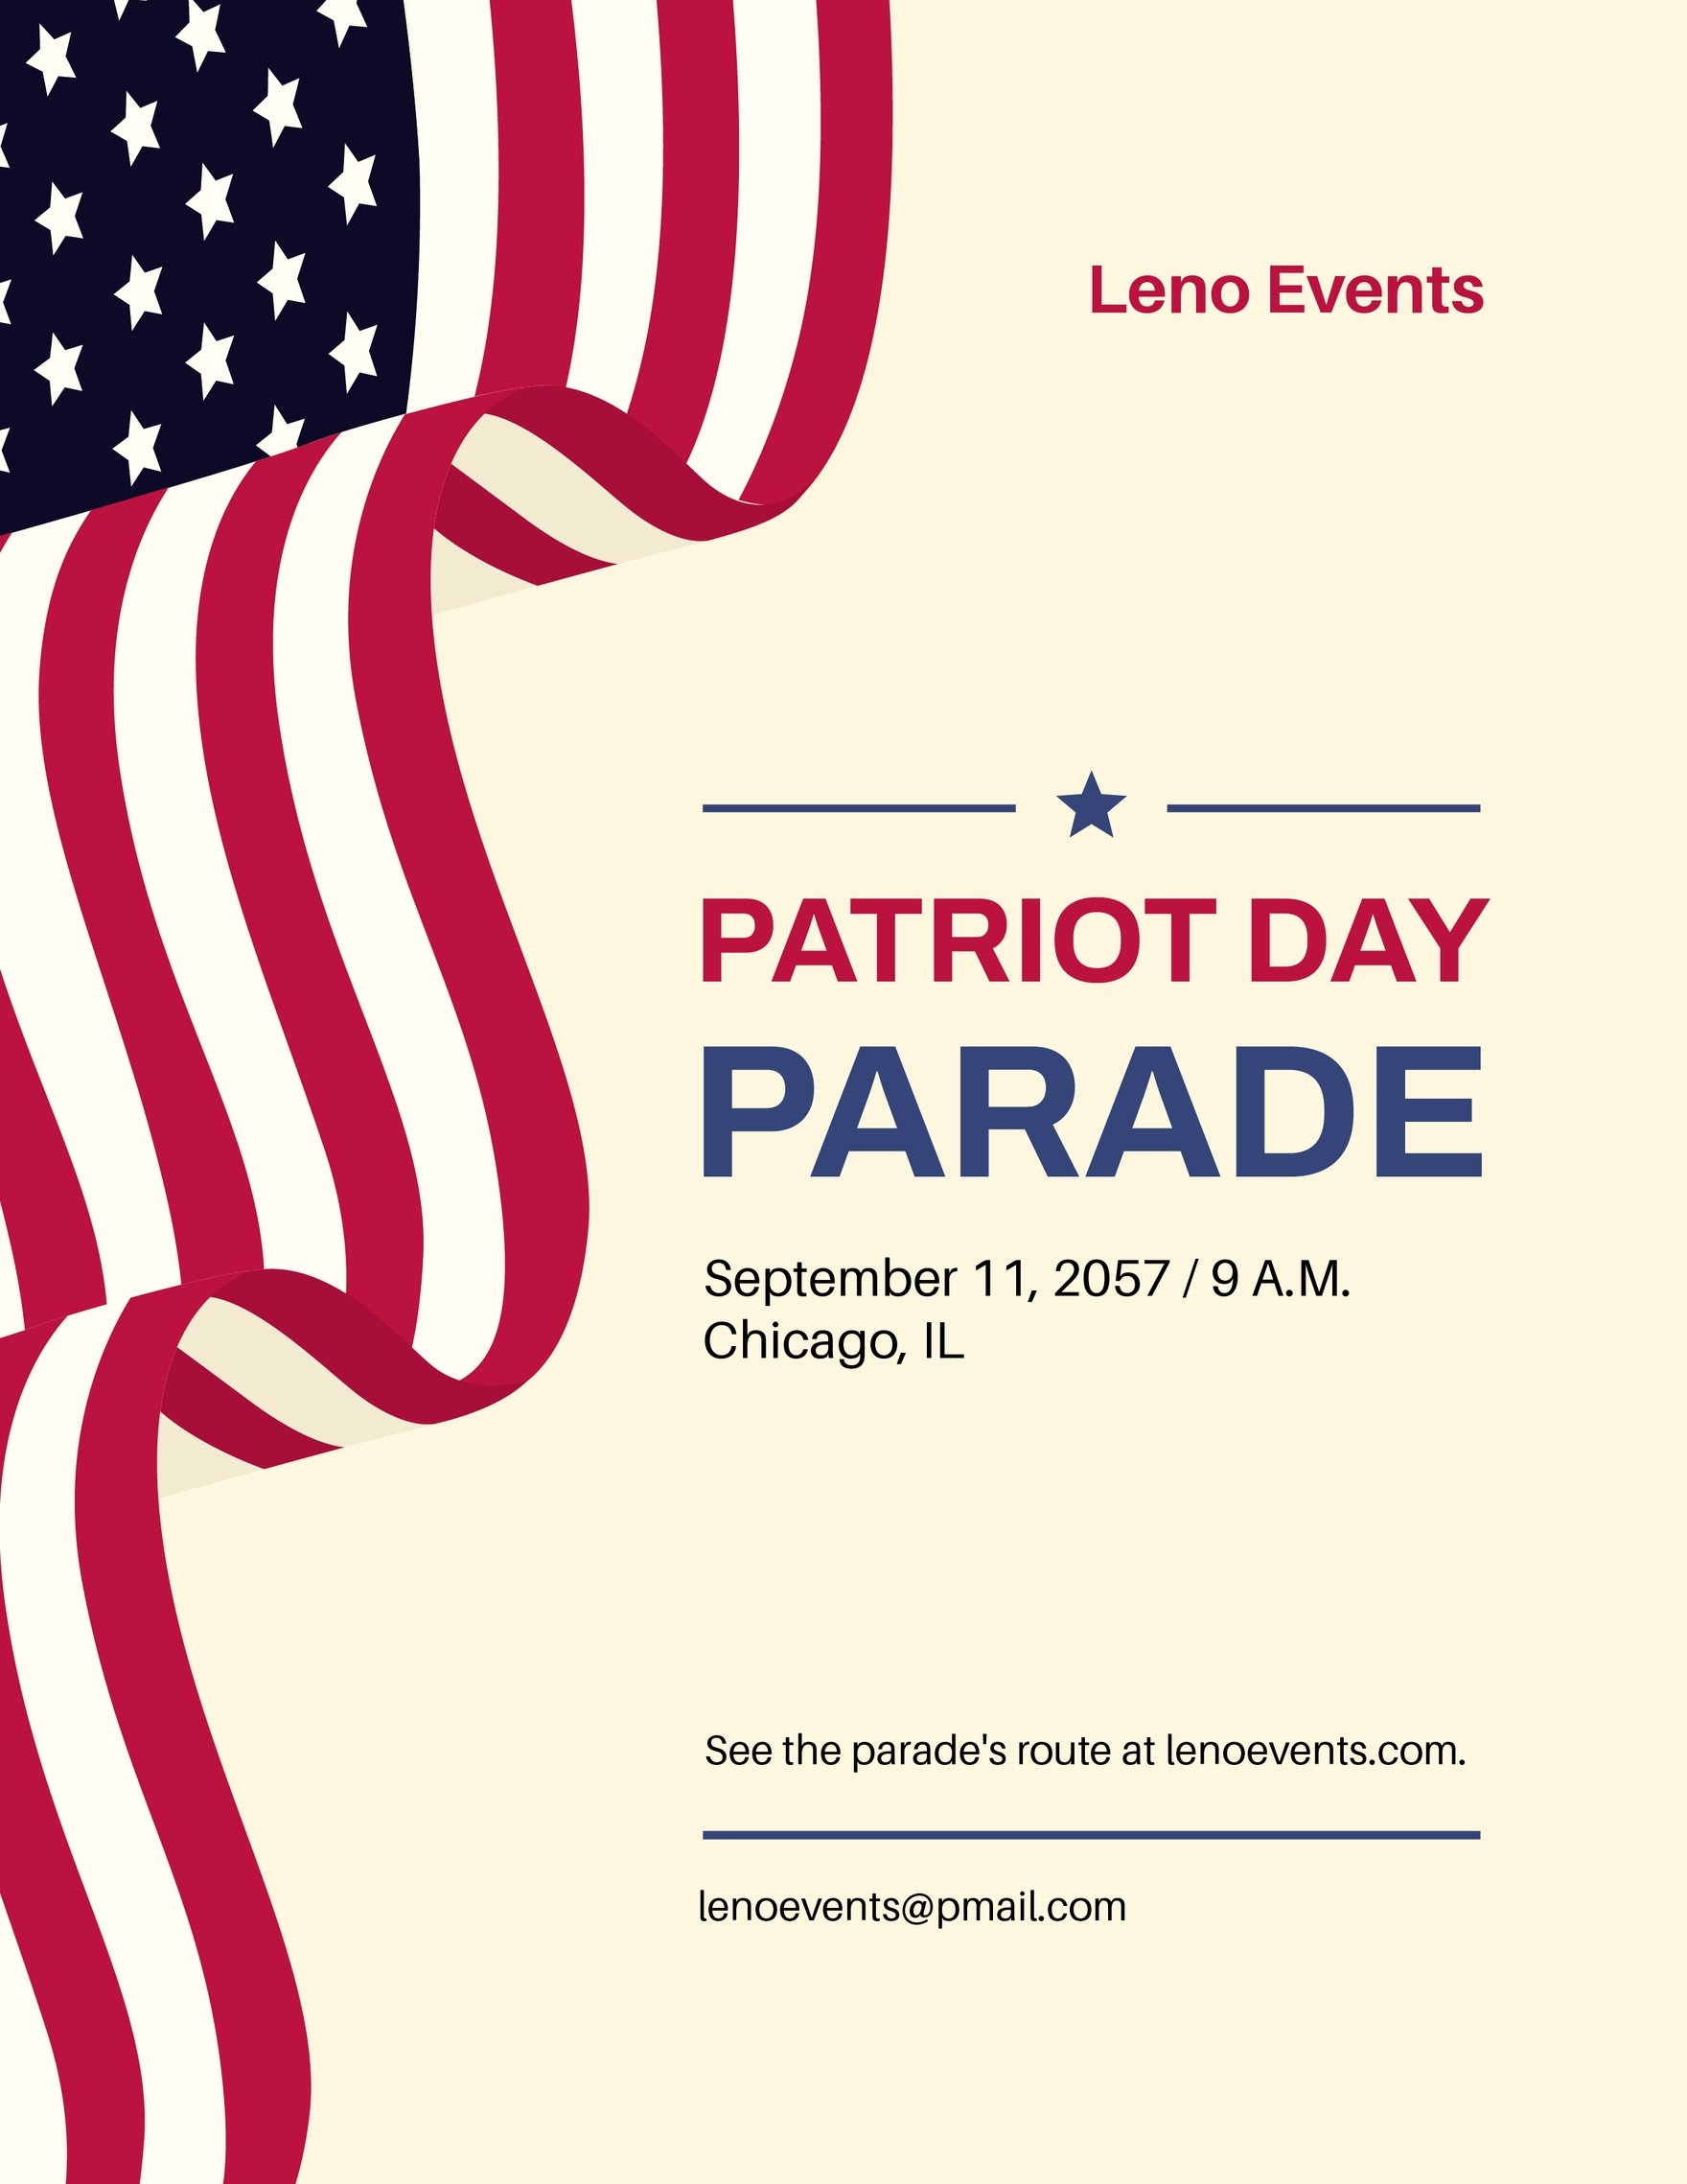 Patriot Day Parade Flyer in Word, Google Docs, Illustrator, PSD, Apple Pages, Publisher